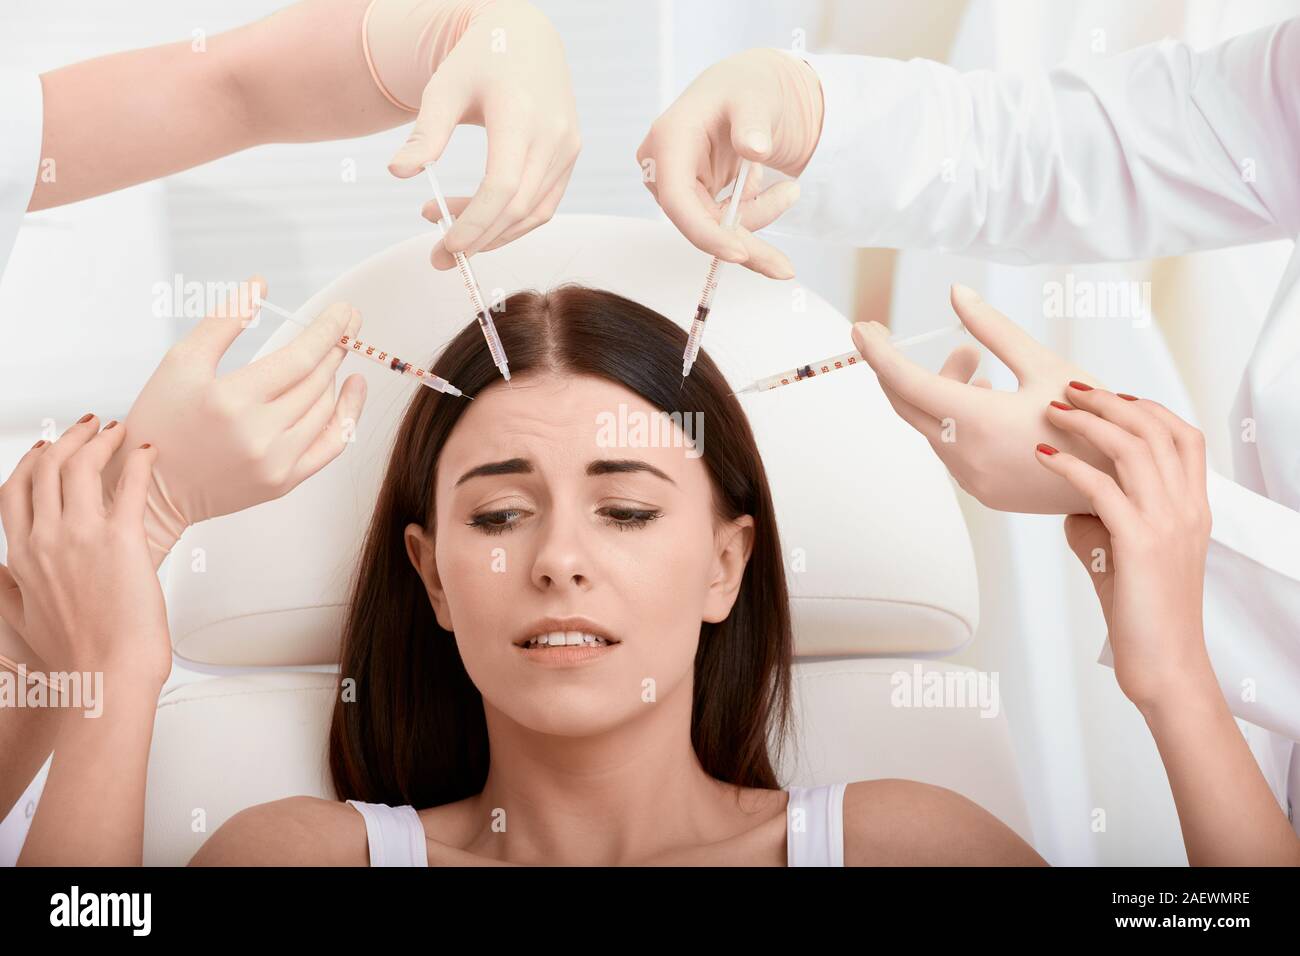 Aestethic medicine - idea of fear about aesthetic medicine treatments Stock Photo